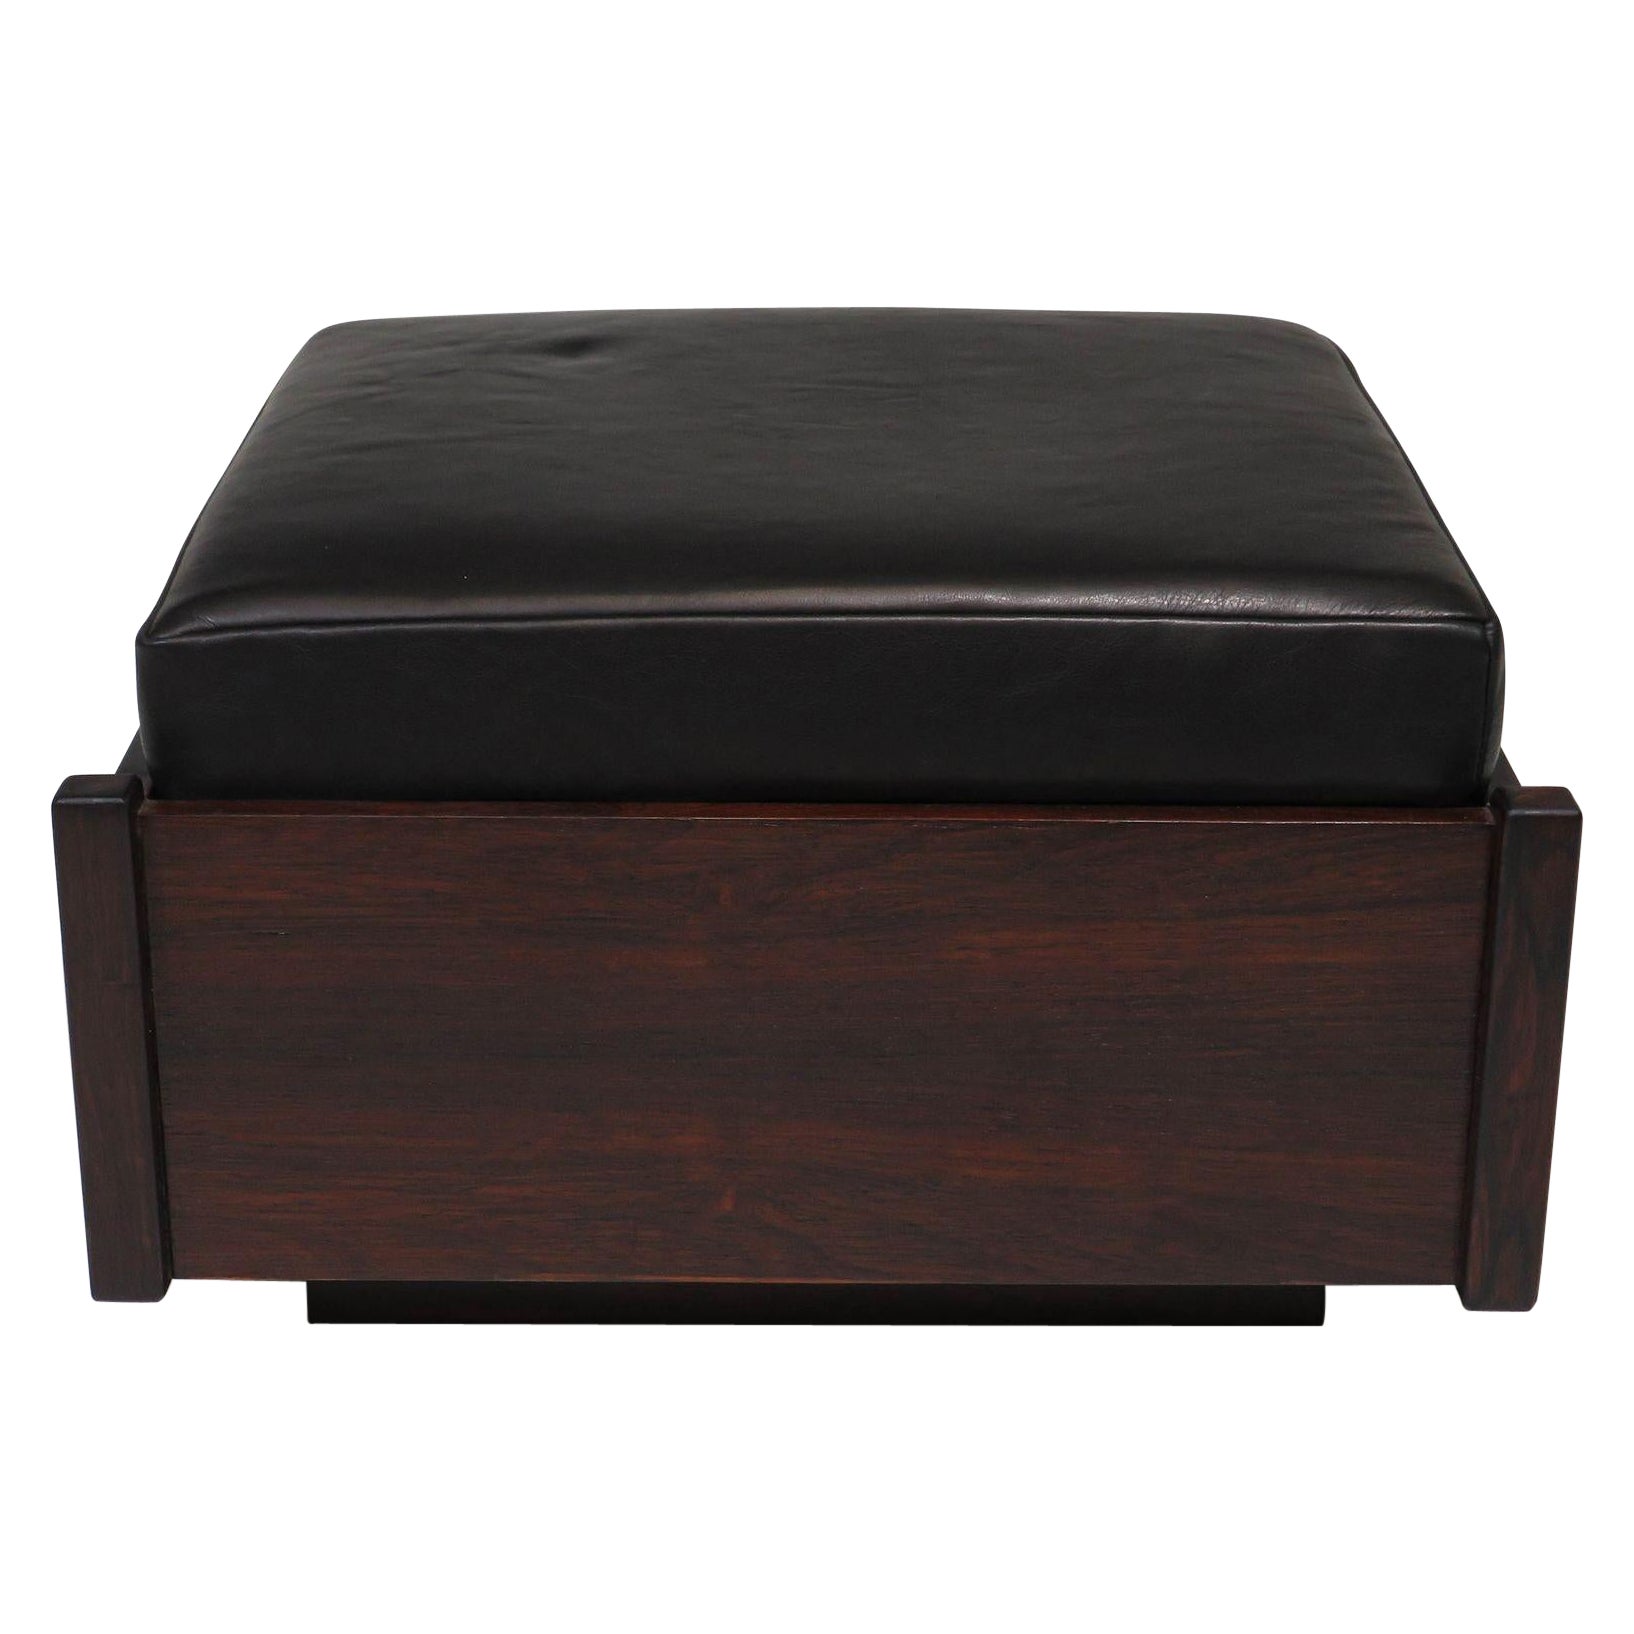 Celina Decoracoes Rosewood Leather Bench with Storage